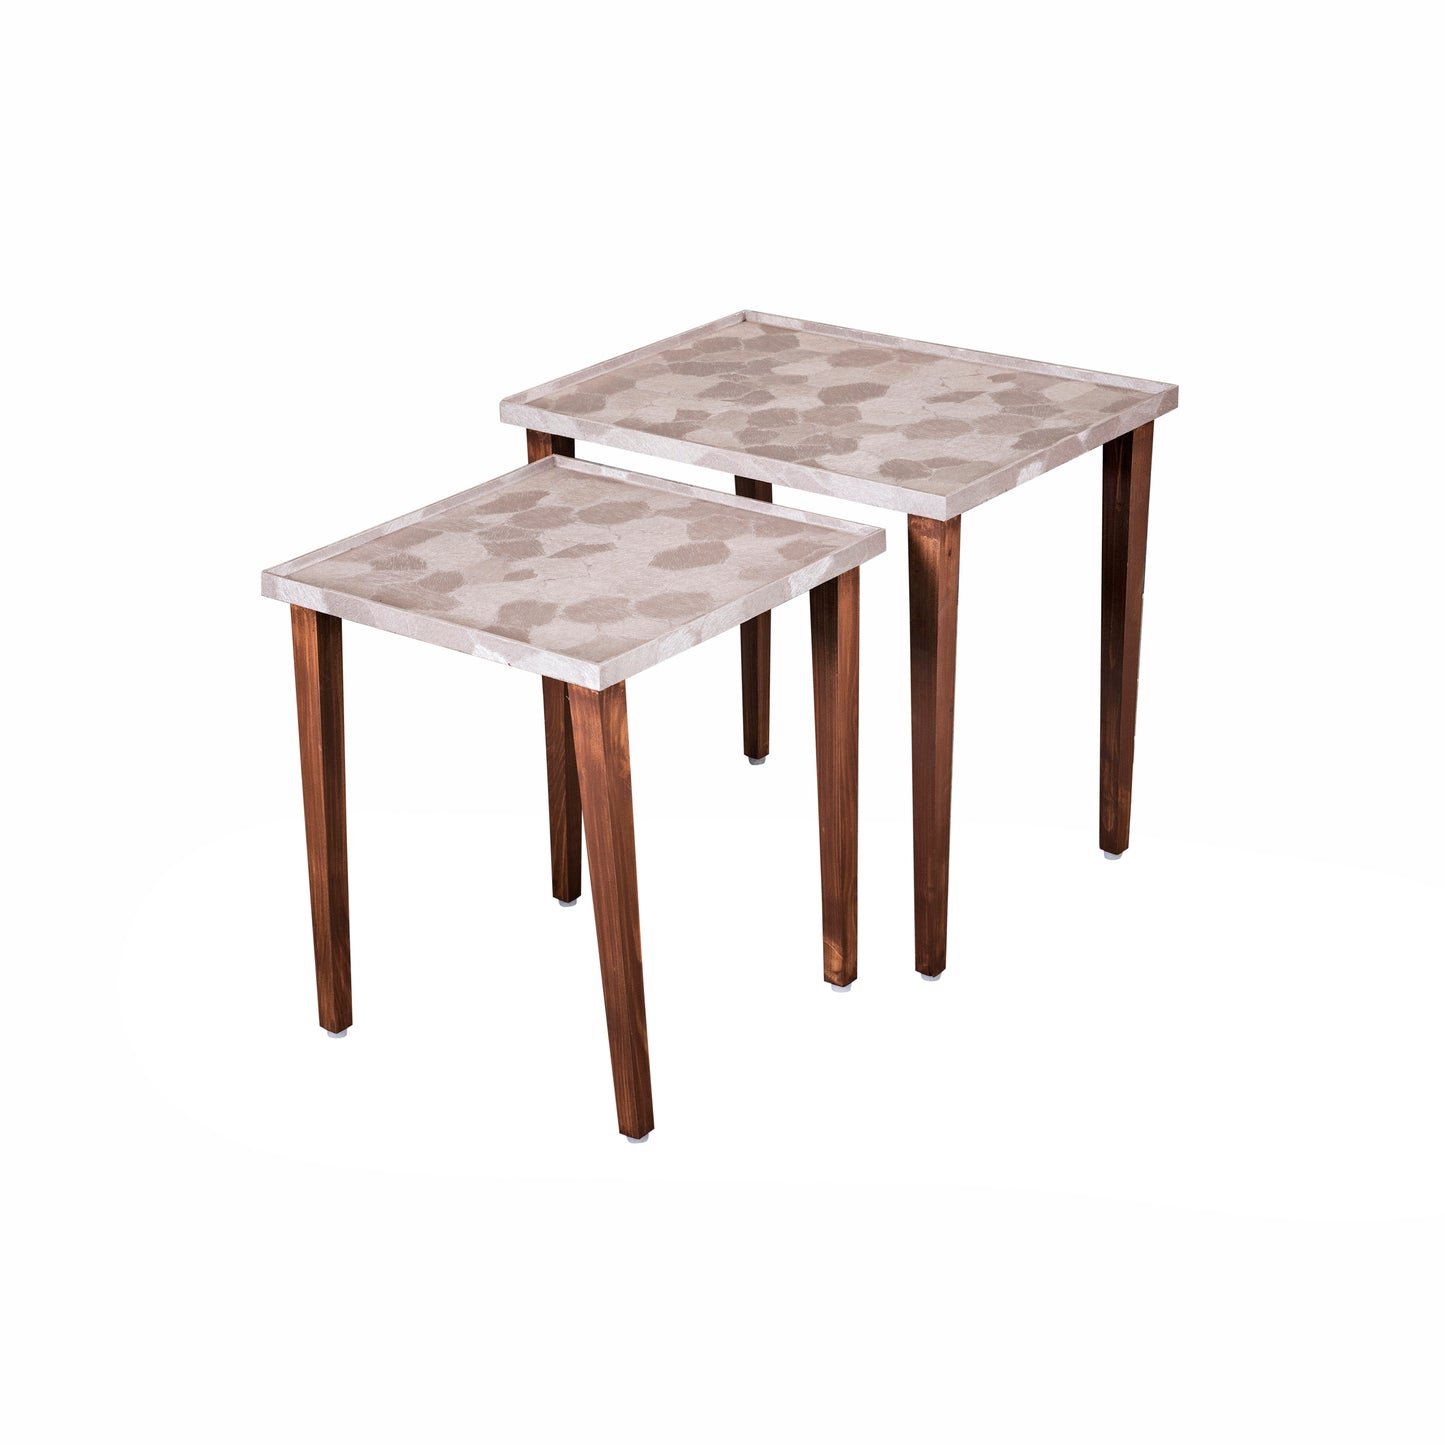 A Tiny Mistake Allure Rose Gold Wooden Rectangle Nesting Tables (Set of 2), Living Room Decor